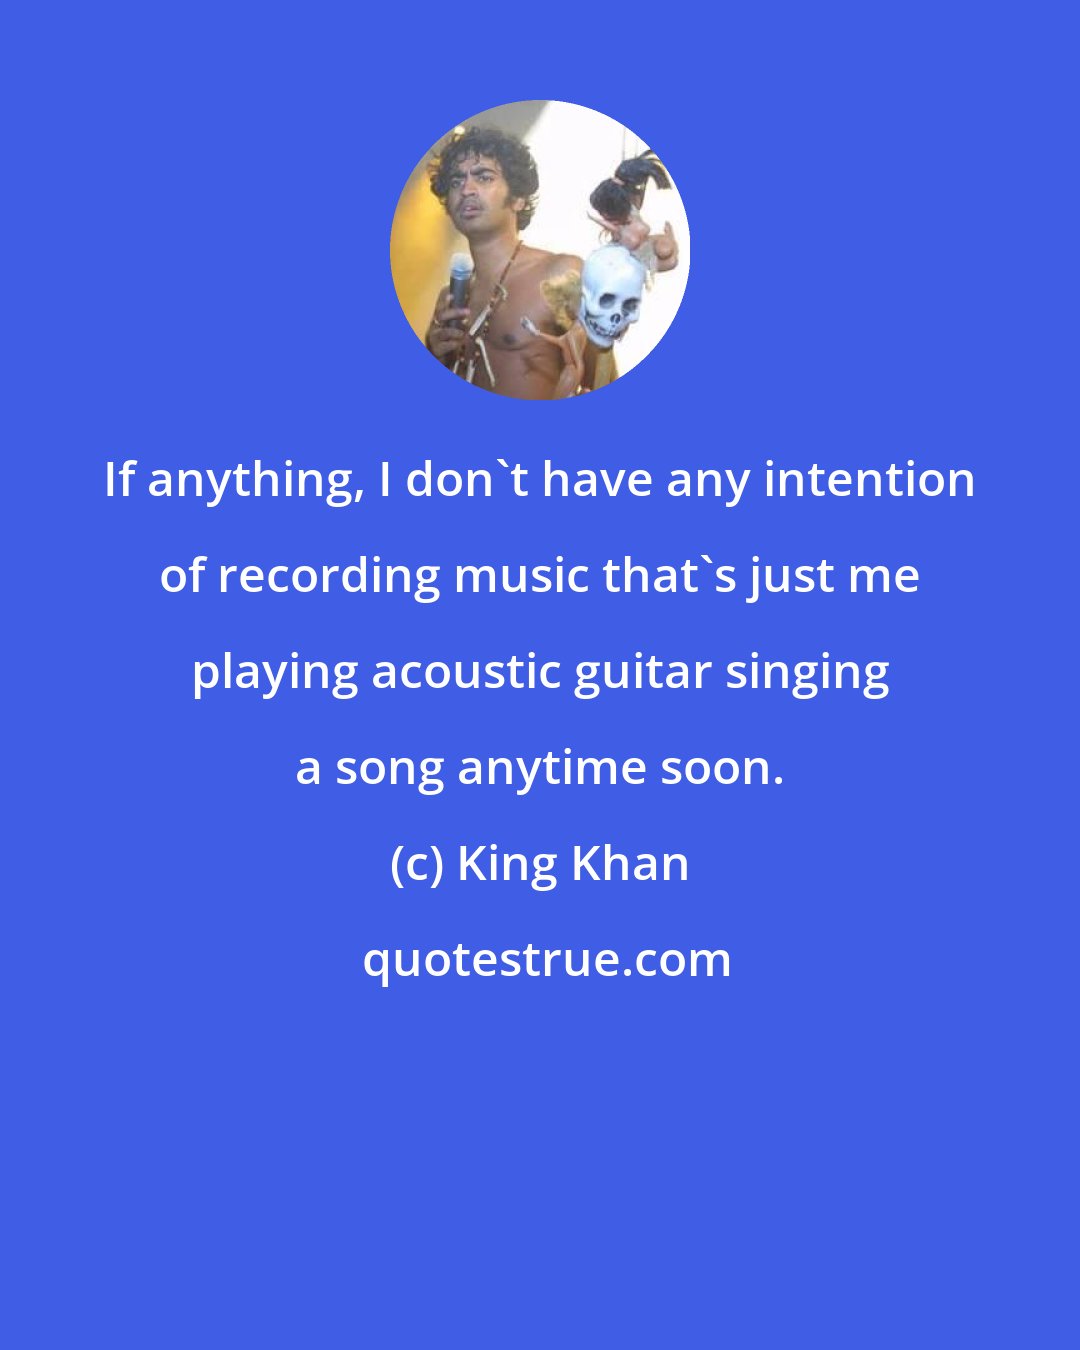 King Khan: If anything, I don't have any intention of recording music that's just me playing acoustic guitar singing a song anytime soon.